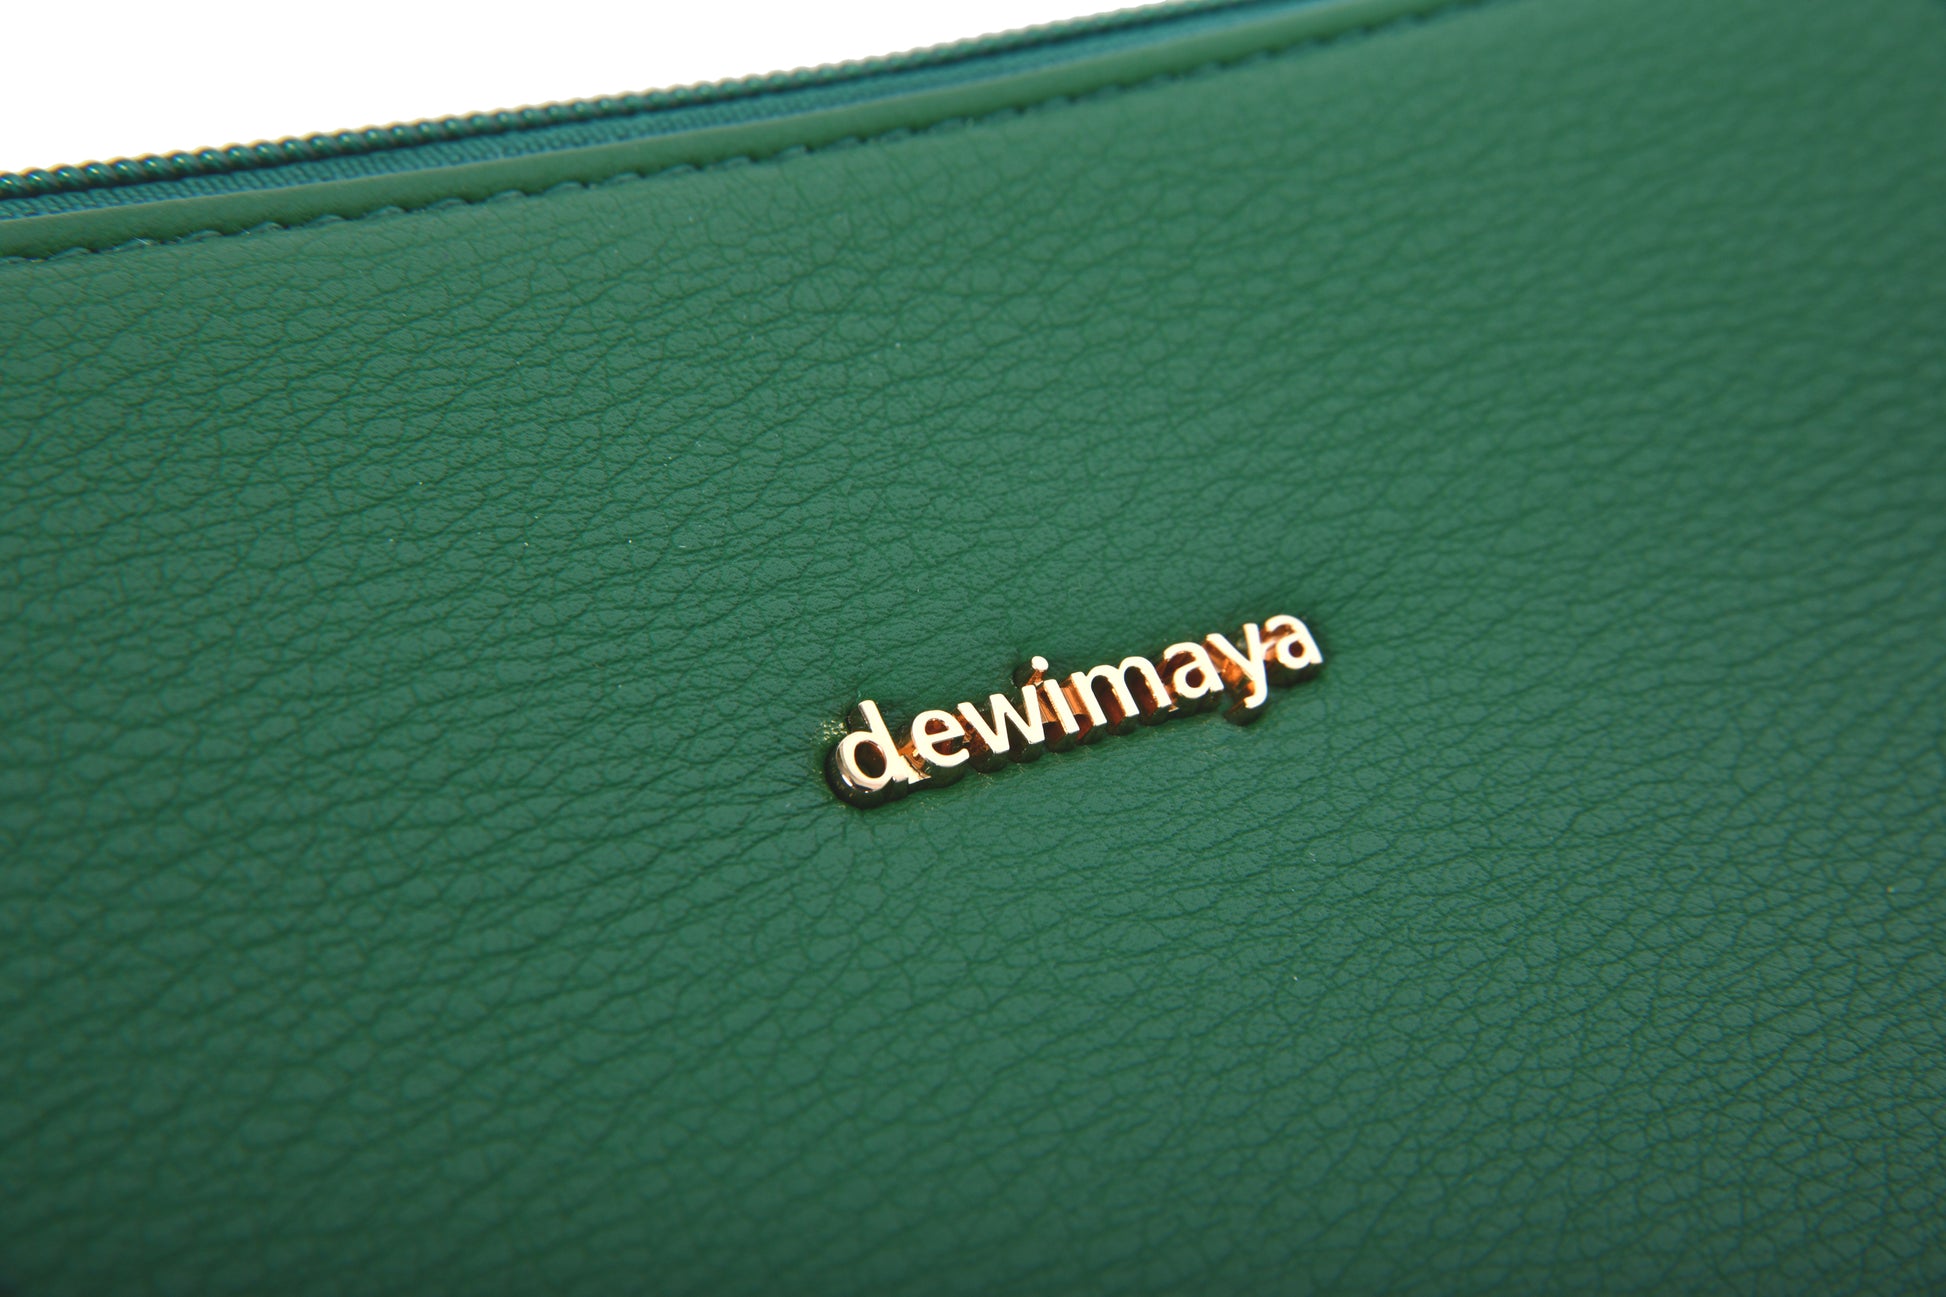 Liliana Green Pebble Grain Faux Leather Handbag Clutch Make up Pouch made by Dewi Maya gold logo available at the best boutique in Upstate South Carolina Spartanburg Greenville Dewi Maya Boutique